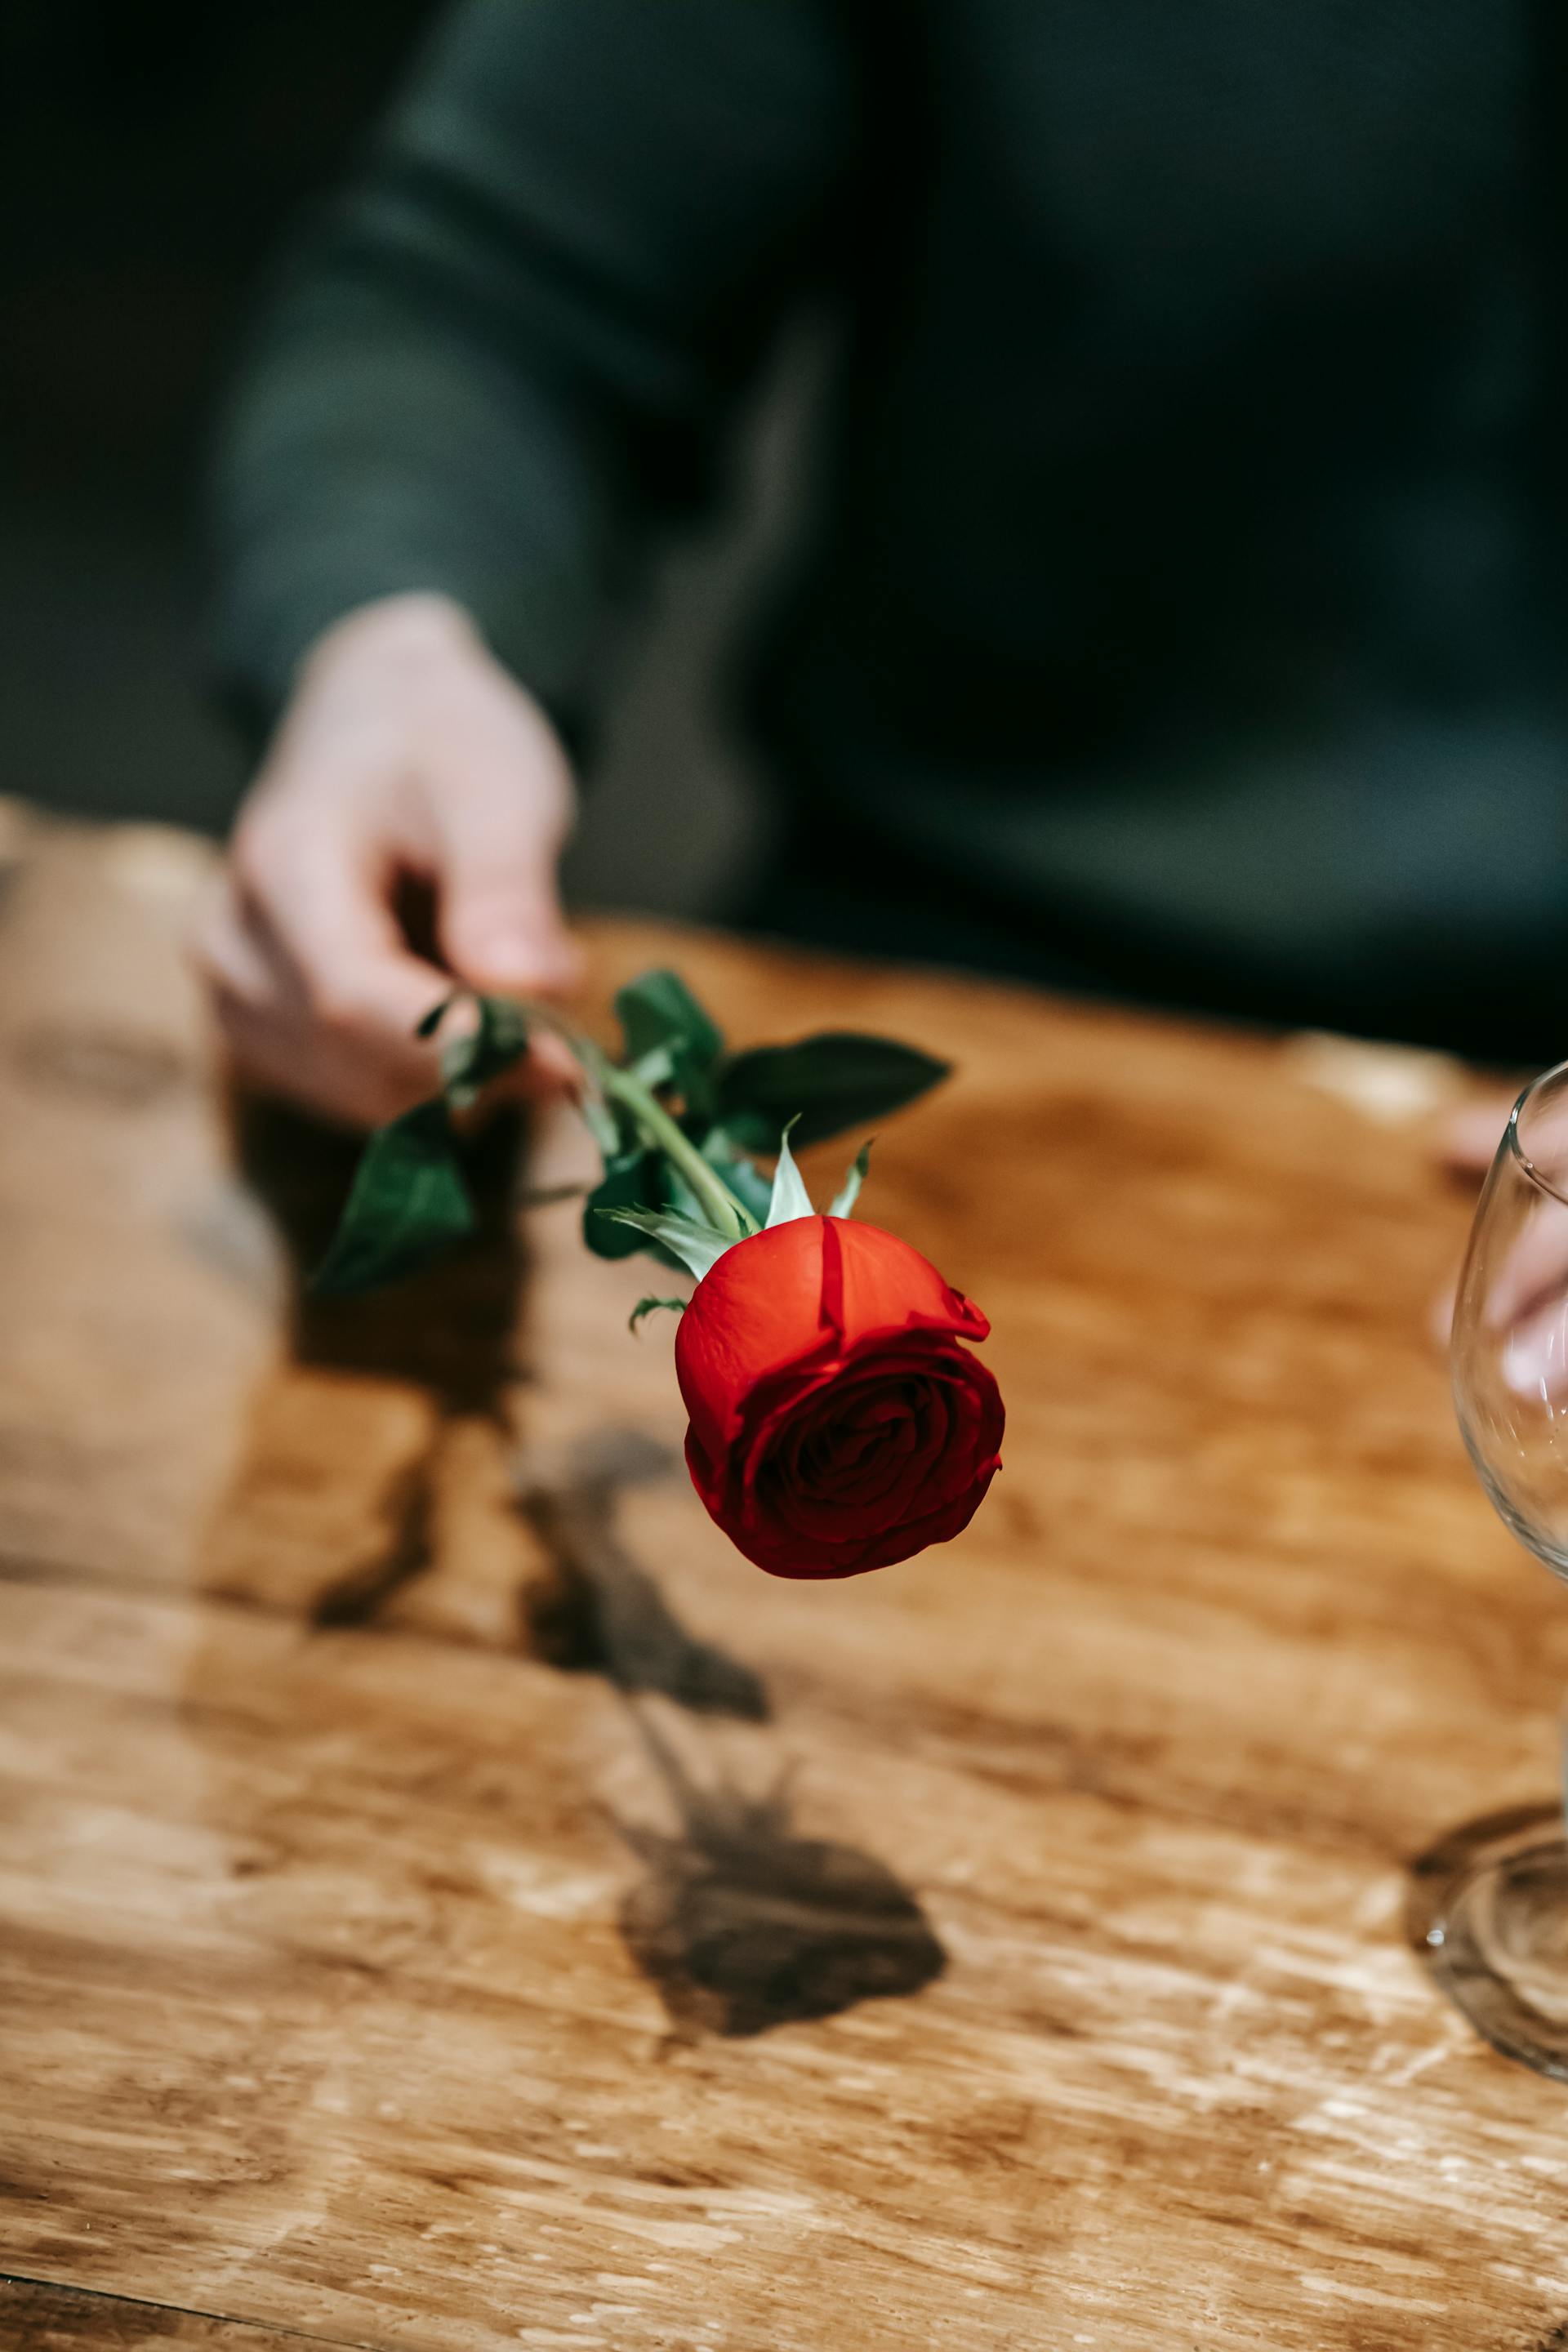 A man holding a red rose | Source: Pexels